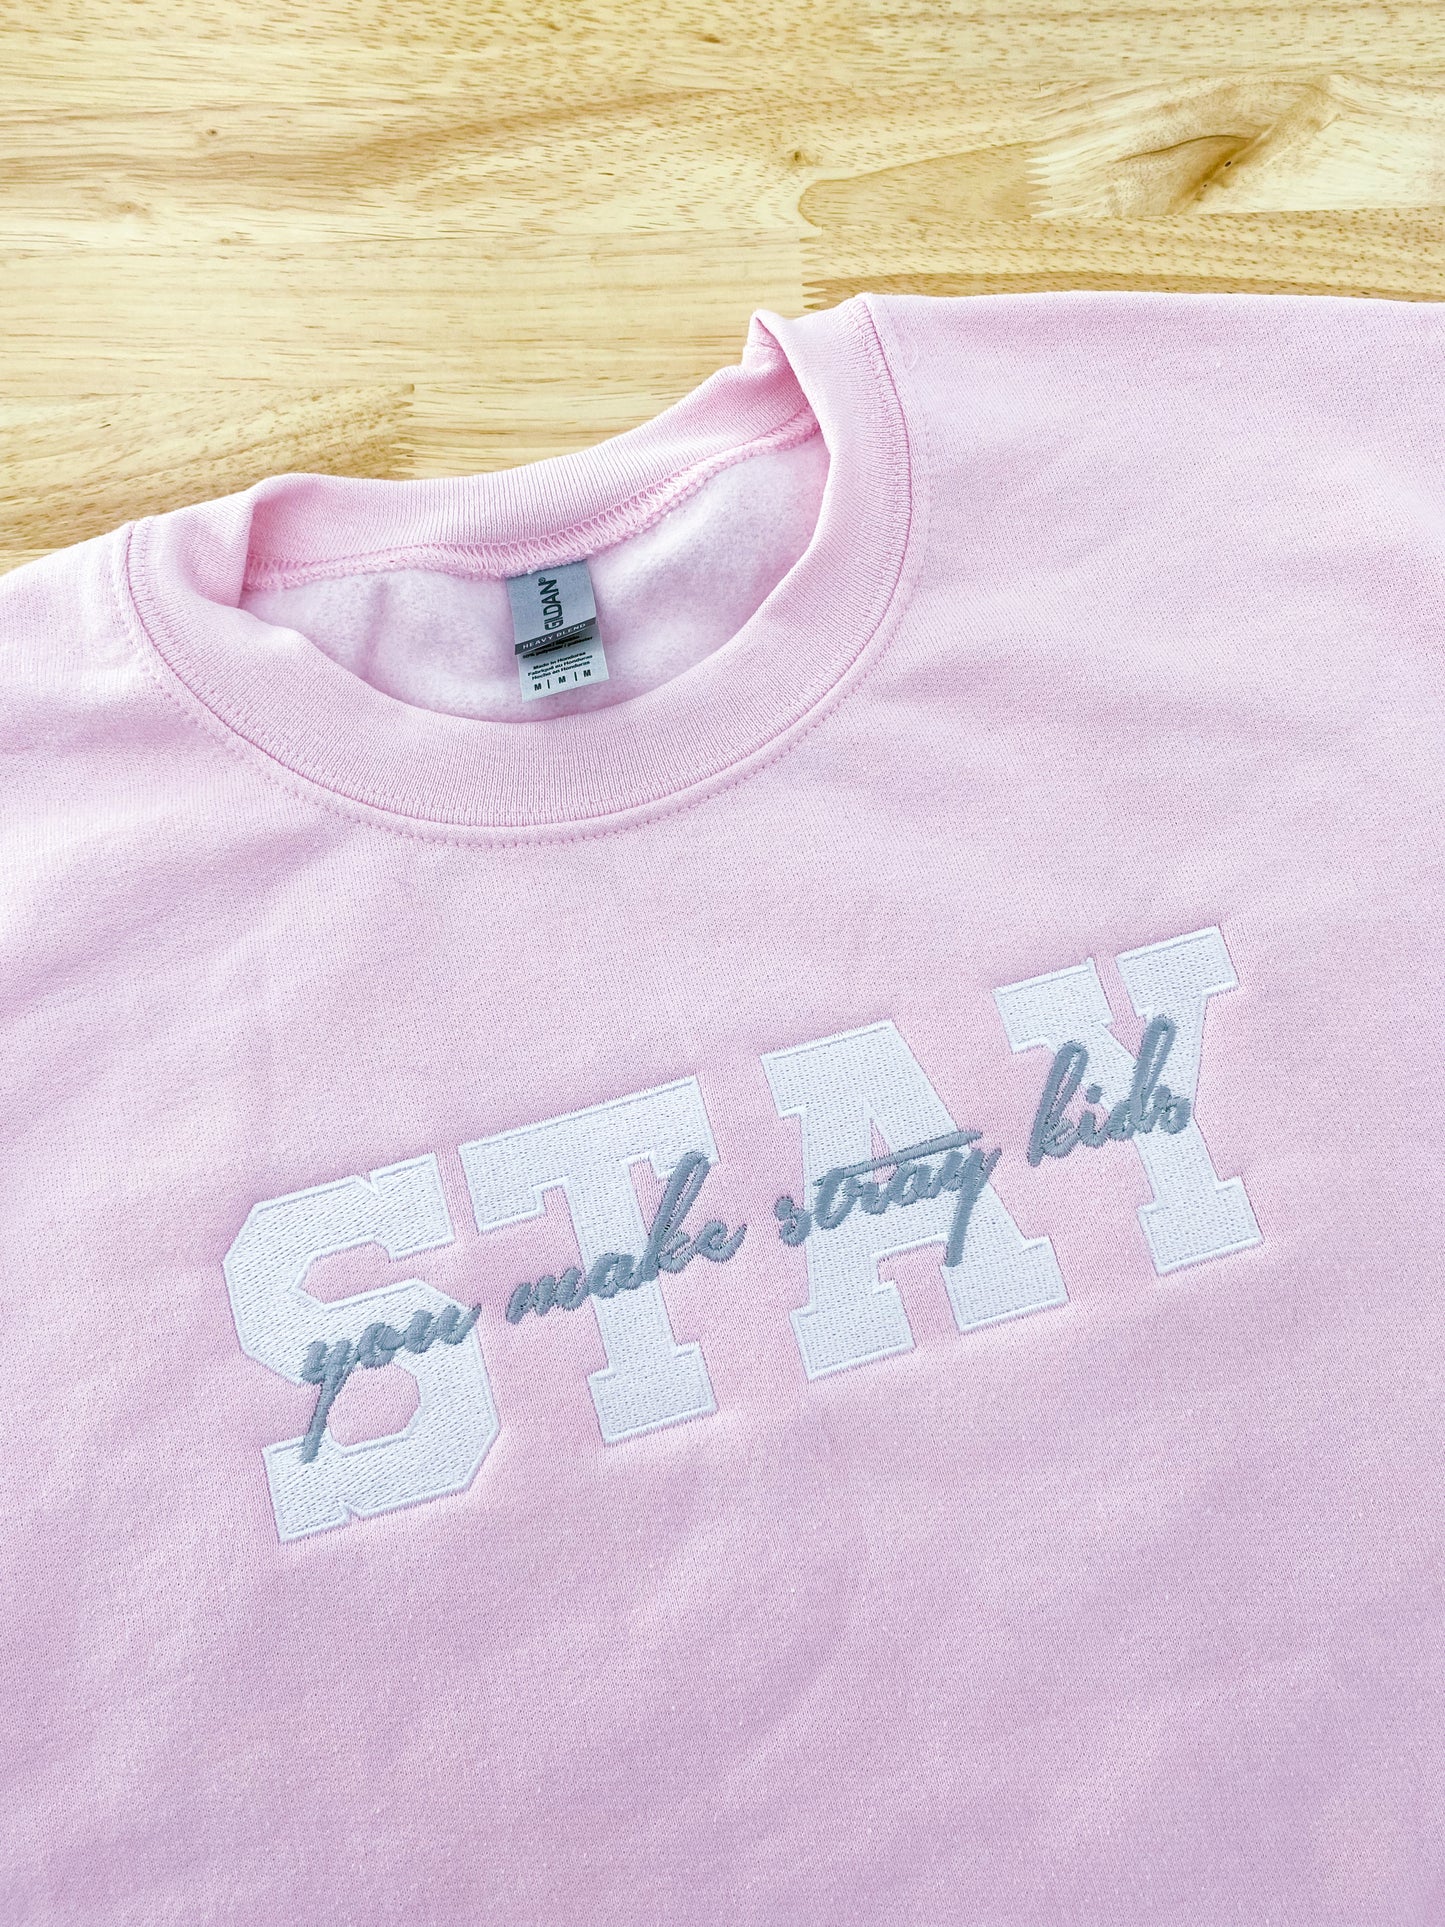 Limited Edition Stay Embroidered Crewneck Sweatshirt